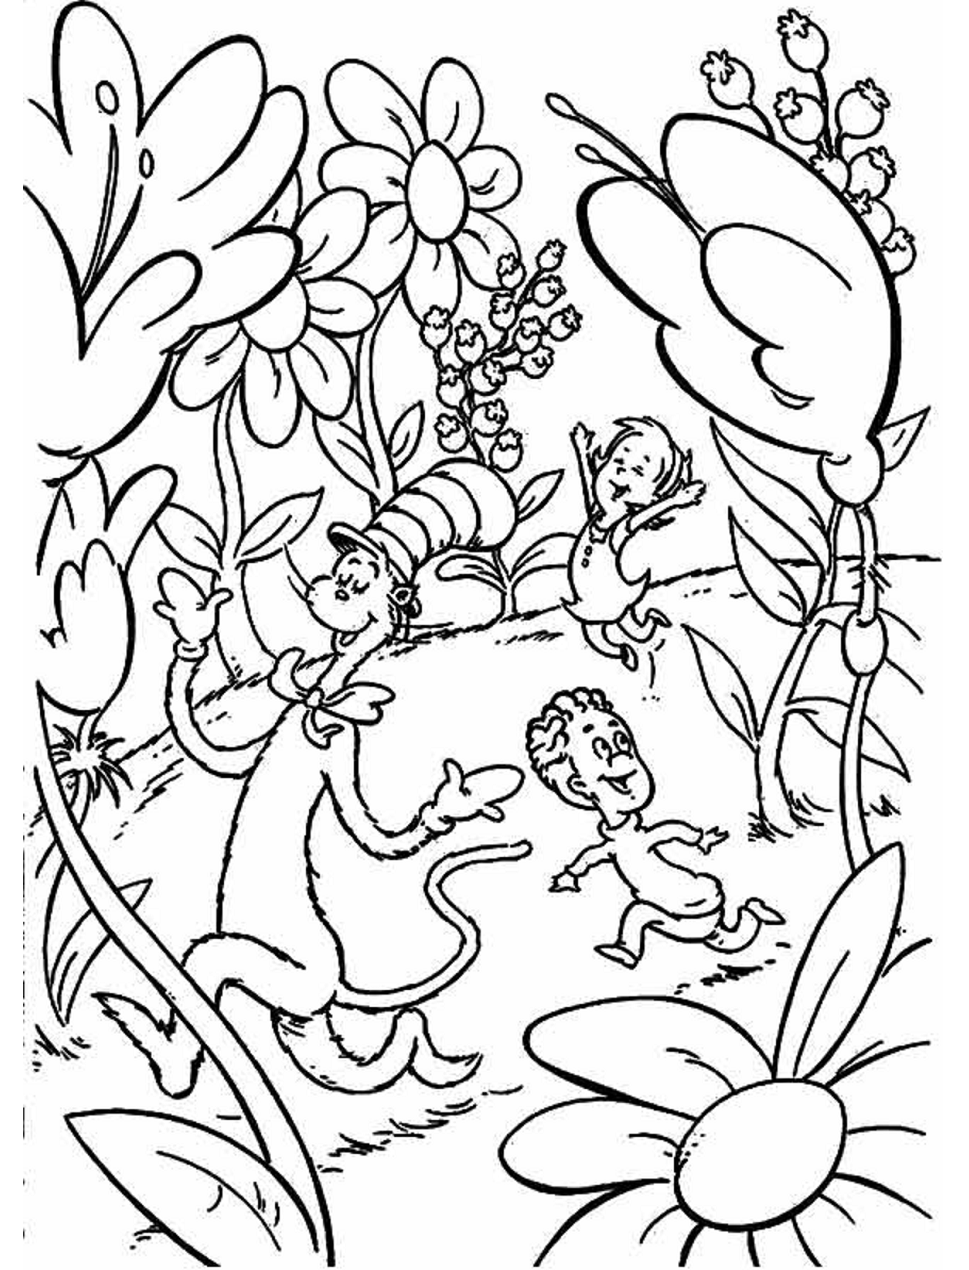 Cat Playing In The Garden Coloring Page - Free Printable Coloring Pages